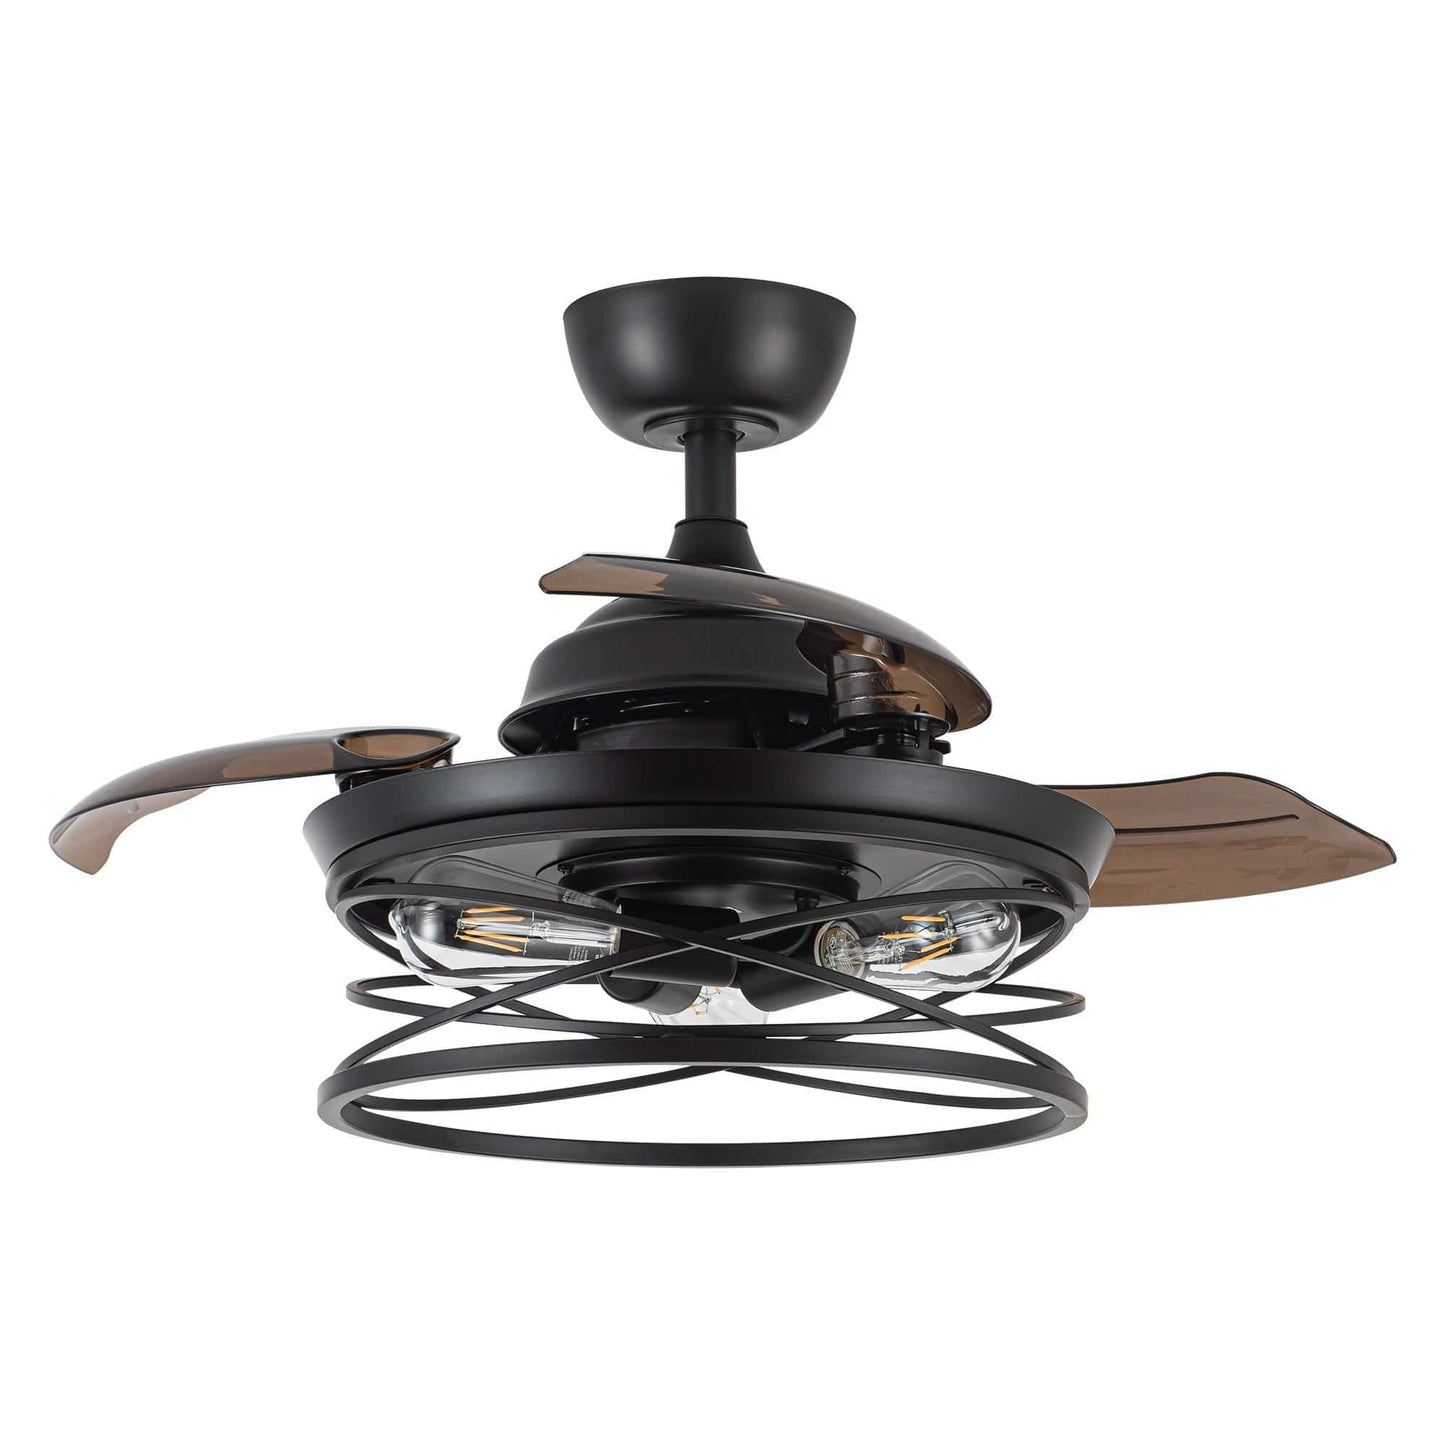 Parrot Uncle 36" Petra Industrial Downrod Mount Ceiling Fan with Lighting and Remote Control